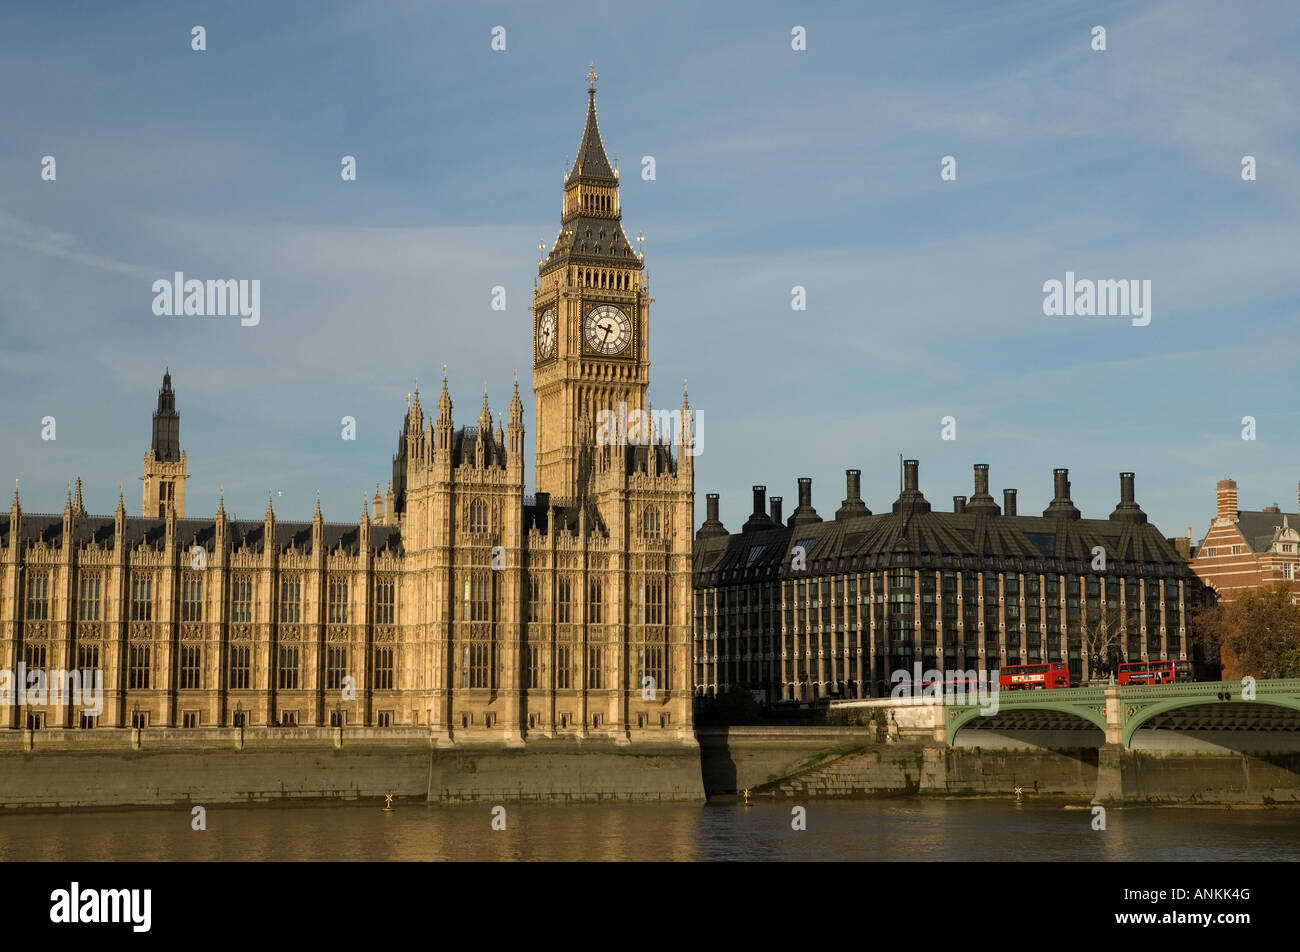 Big Ben and Britain's Houses of Parliament in London, England. Stock Photo